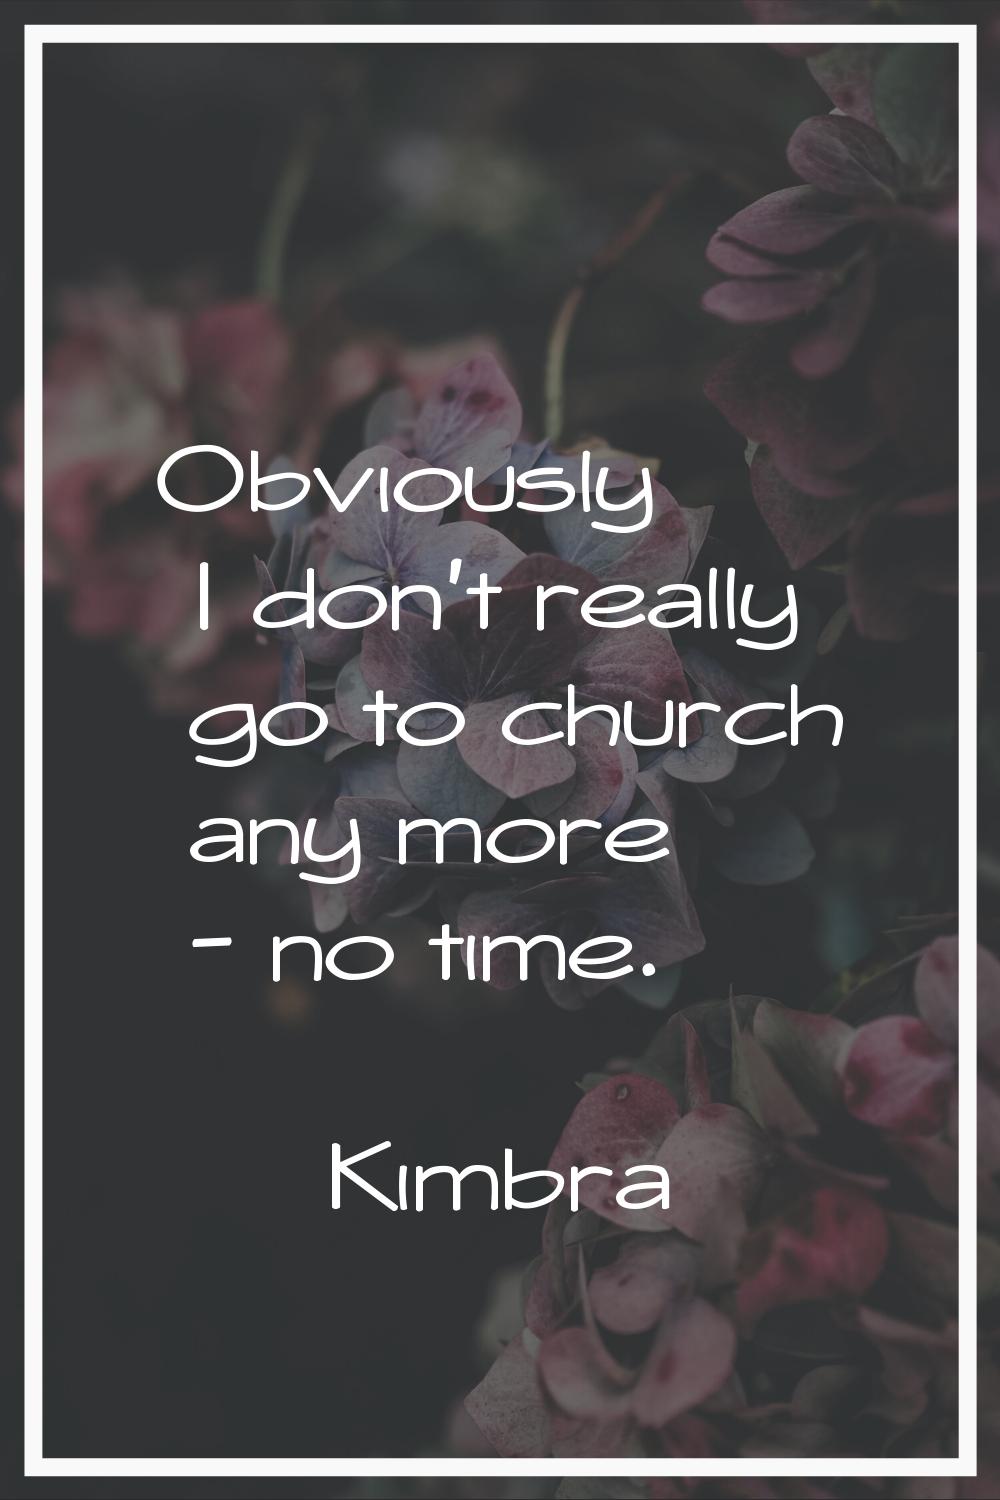 Obviously I don't really go to church any more - no time.